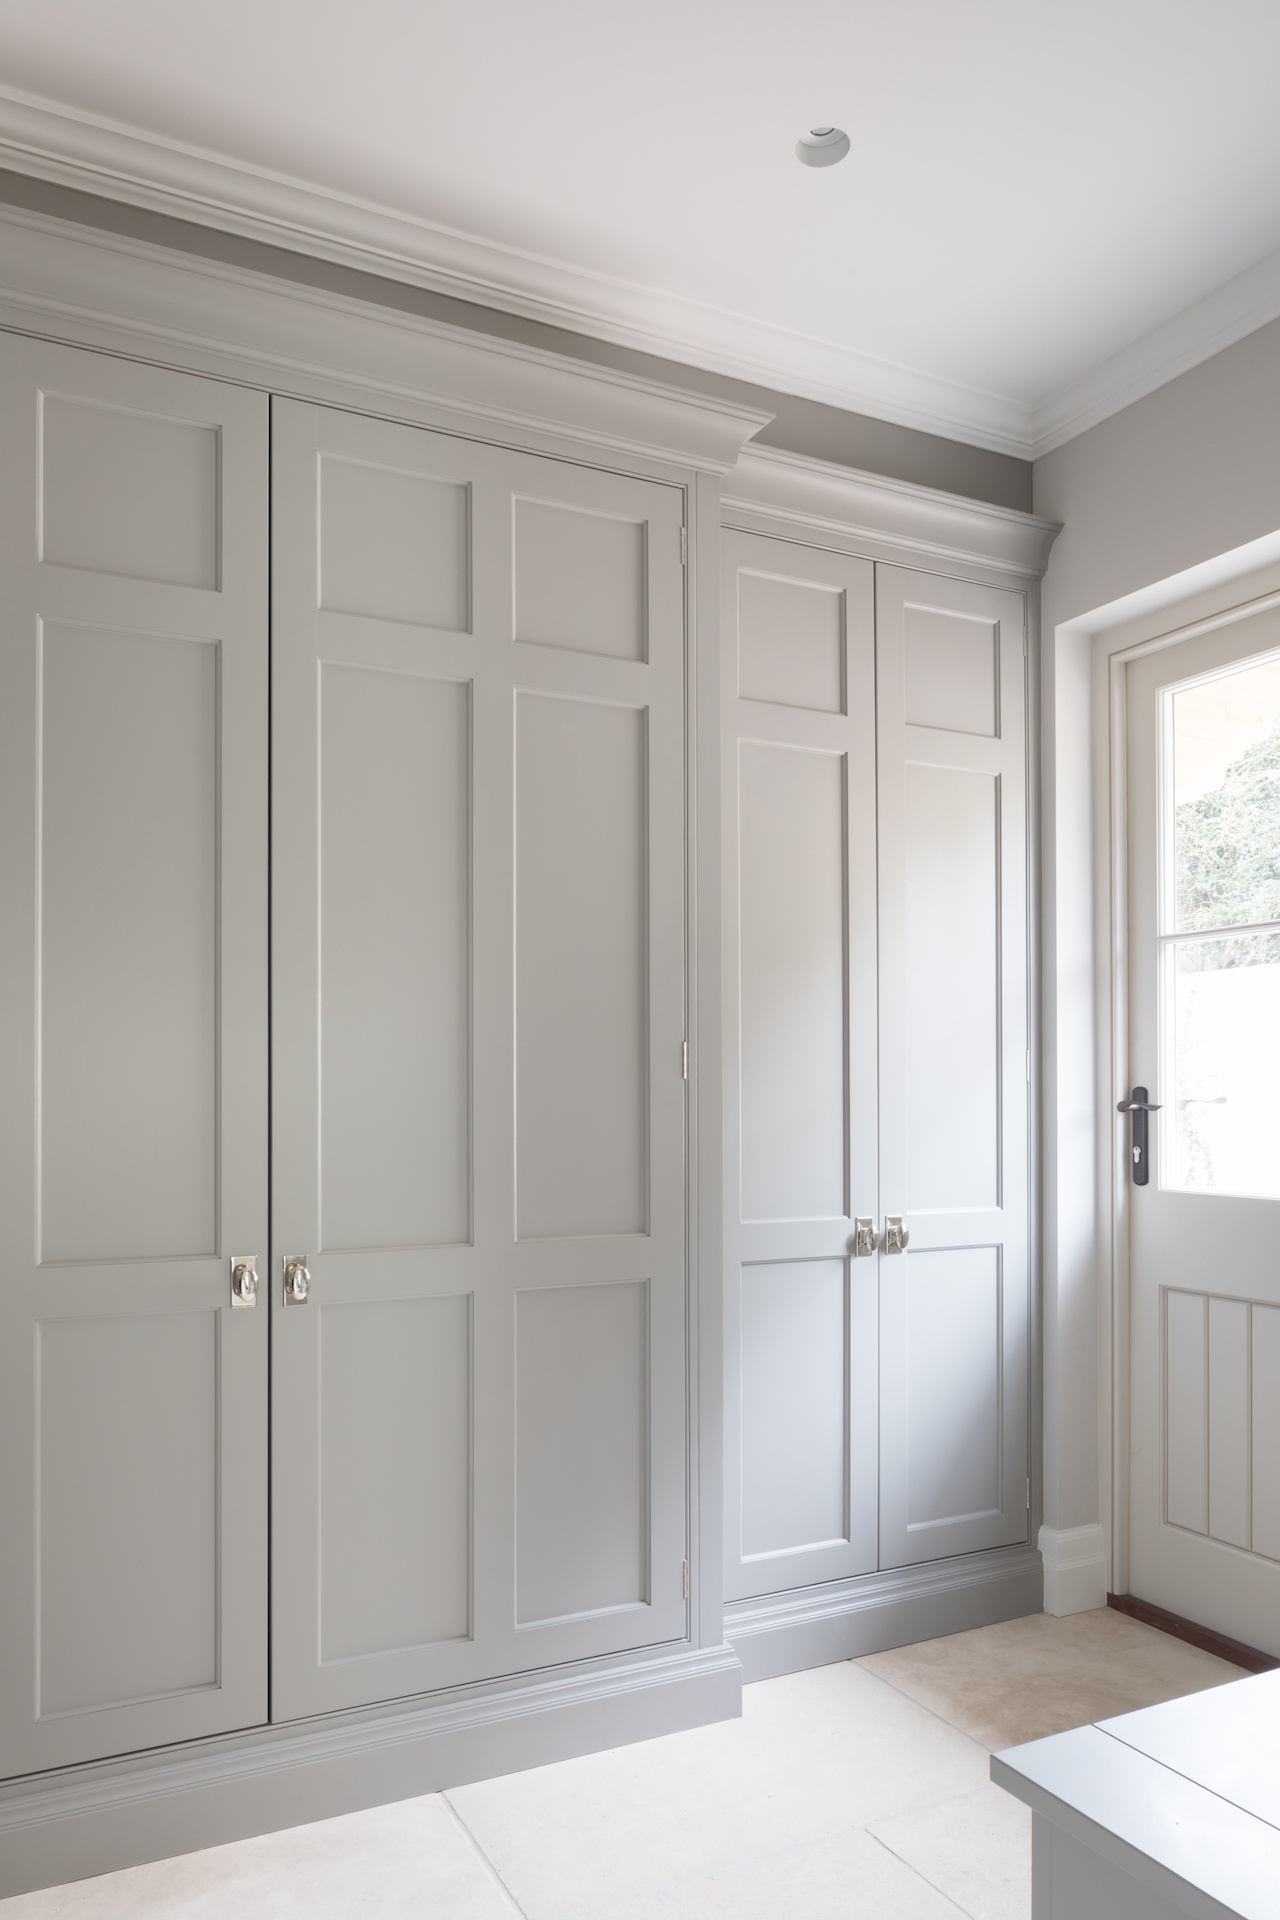 What You Should Know About Buying
Replacement Wardrobe Doors?